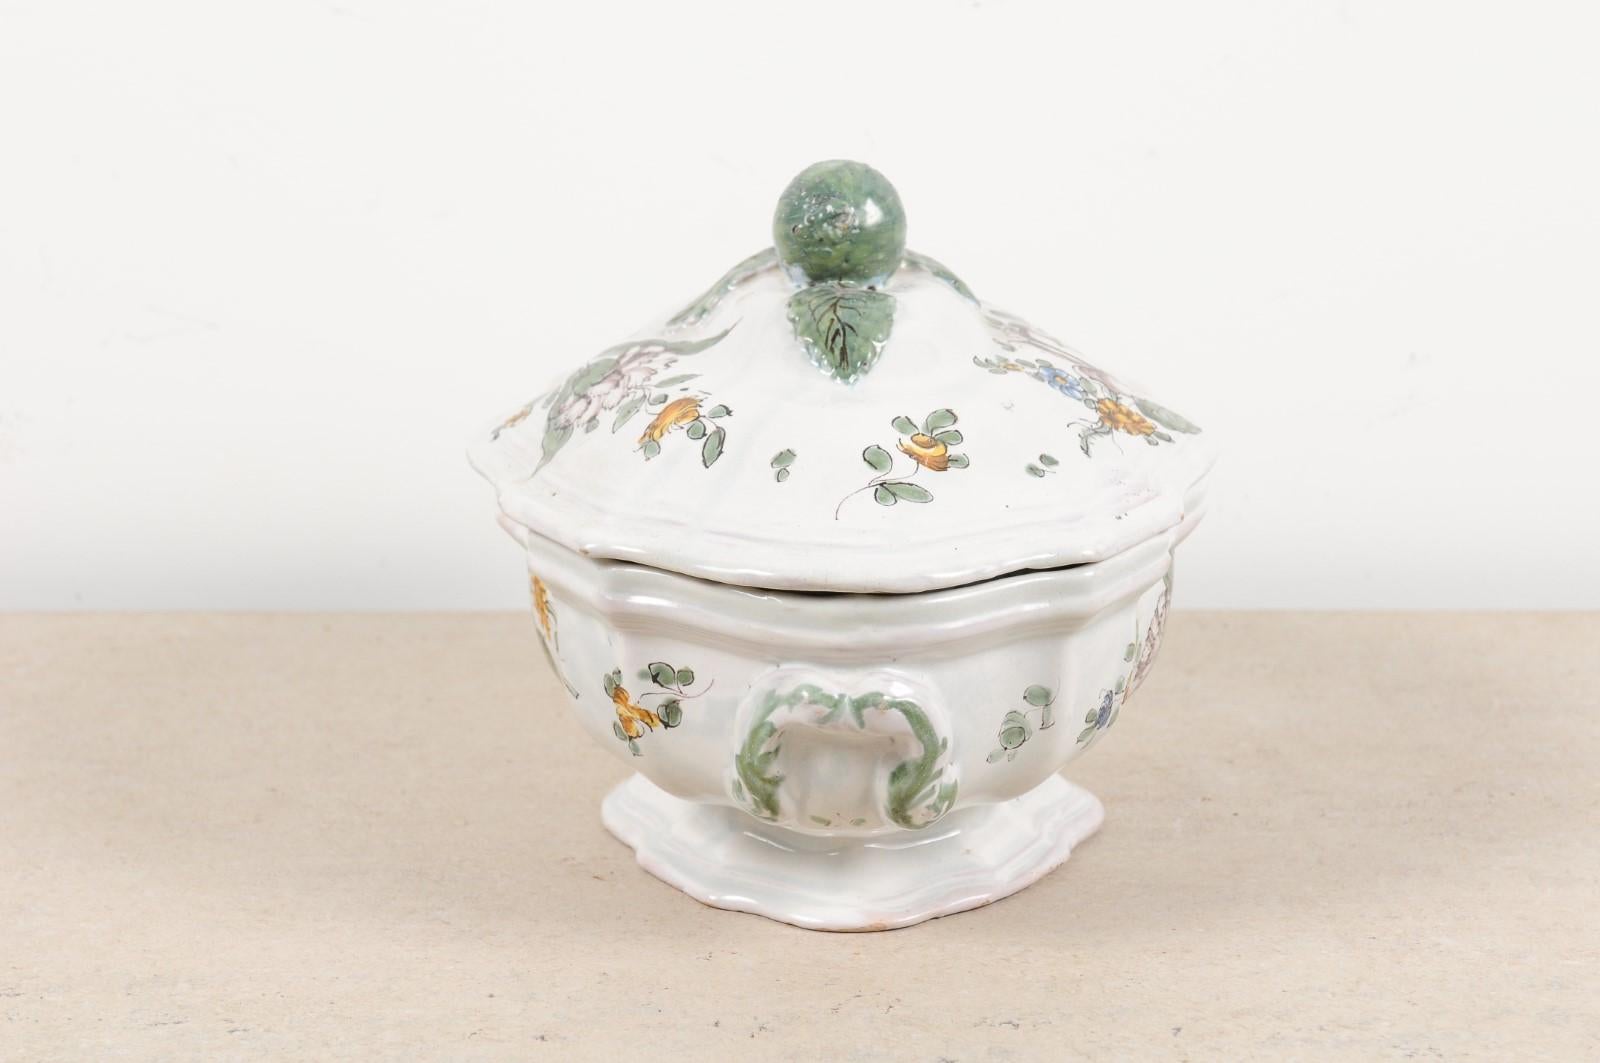 French 1750s Faience Oval Shaped Soup Tureen from Bordeaux with Floral Decor In Good Condition For Sale In Atlanta, GA